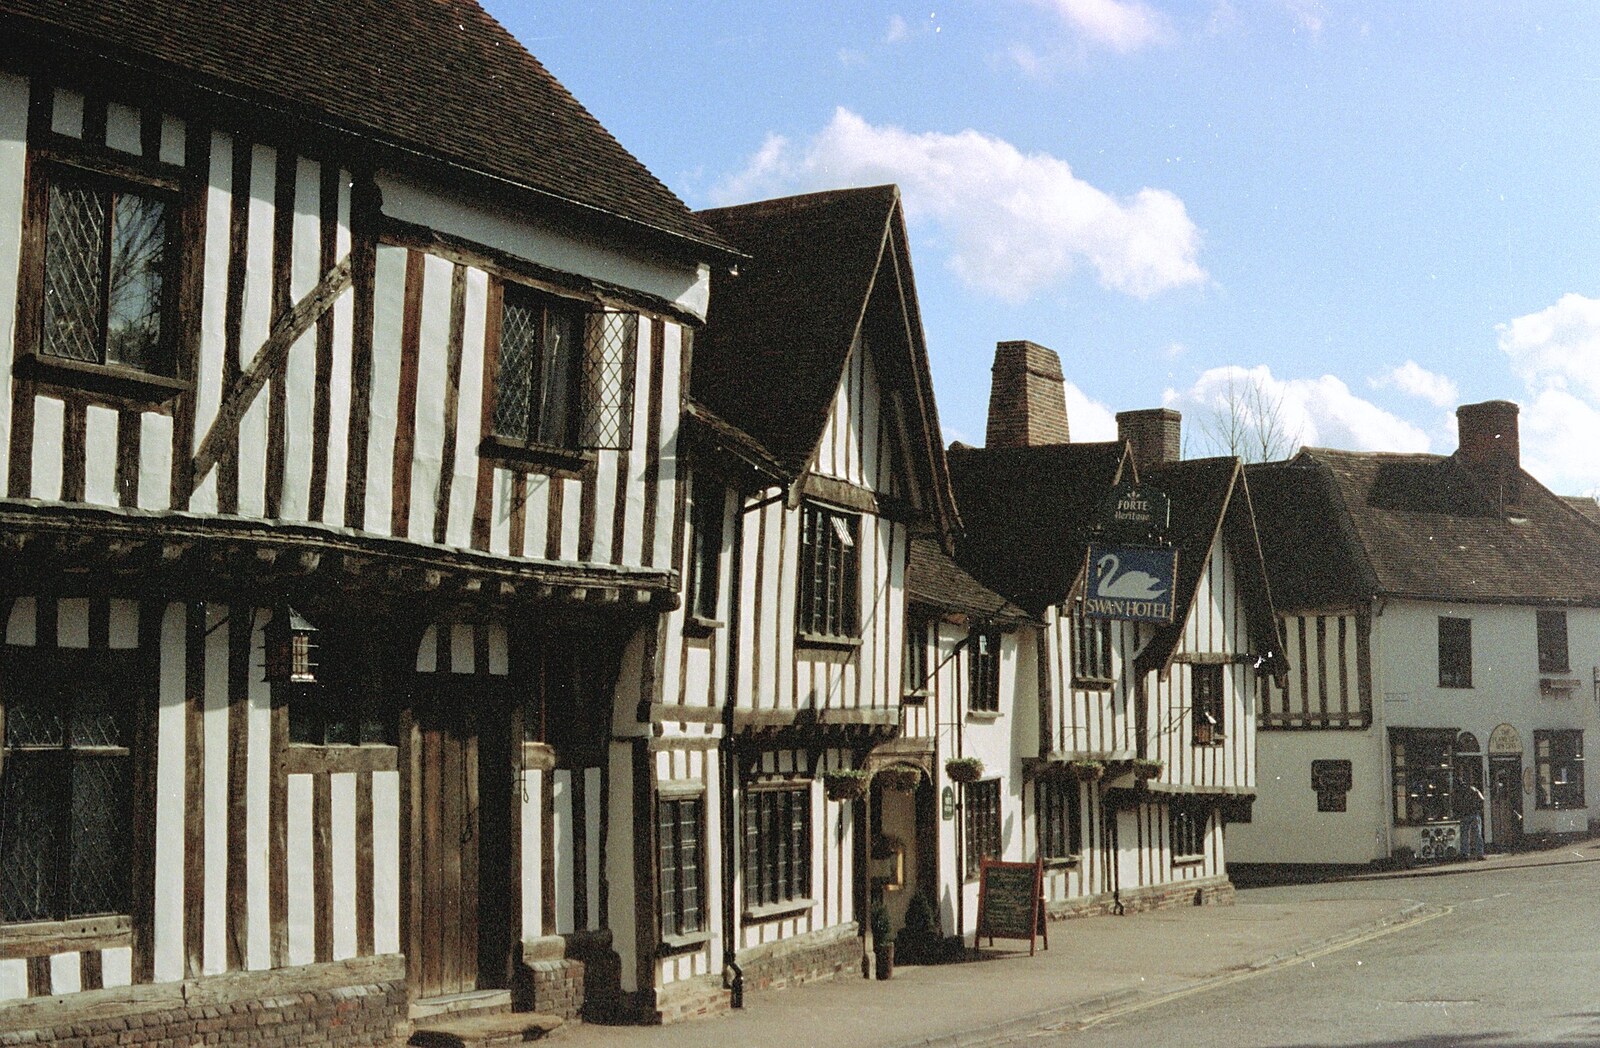 The Swan Hotel, Lavenham from Mother and Mike Visit, Lavenham, Suffolk - 14th April 1996